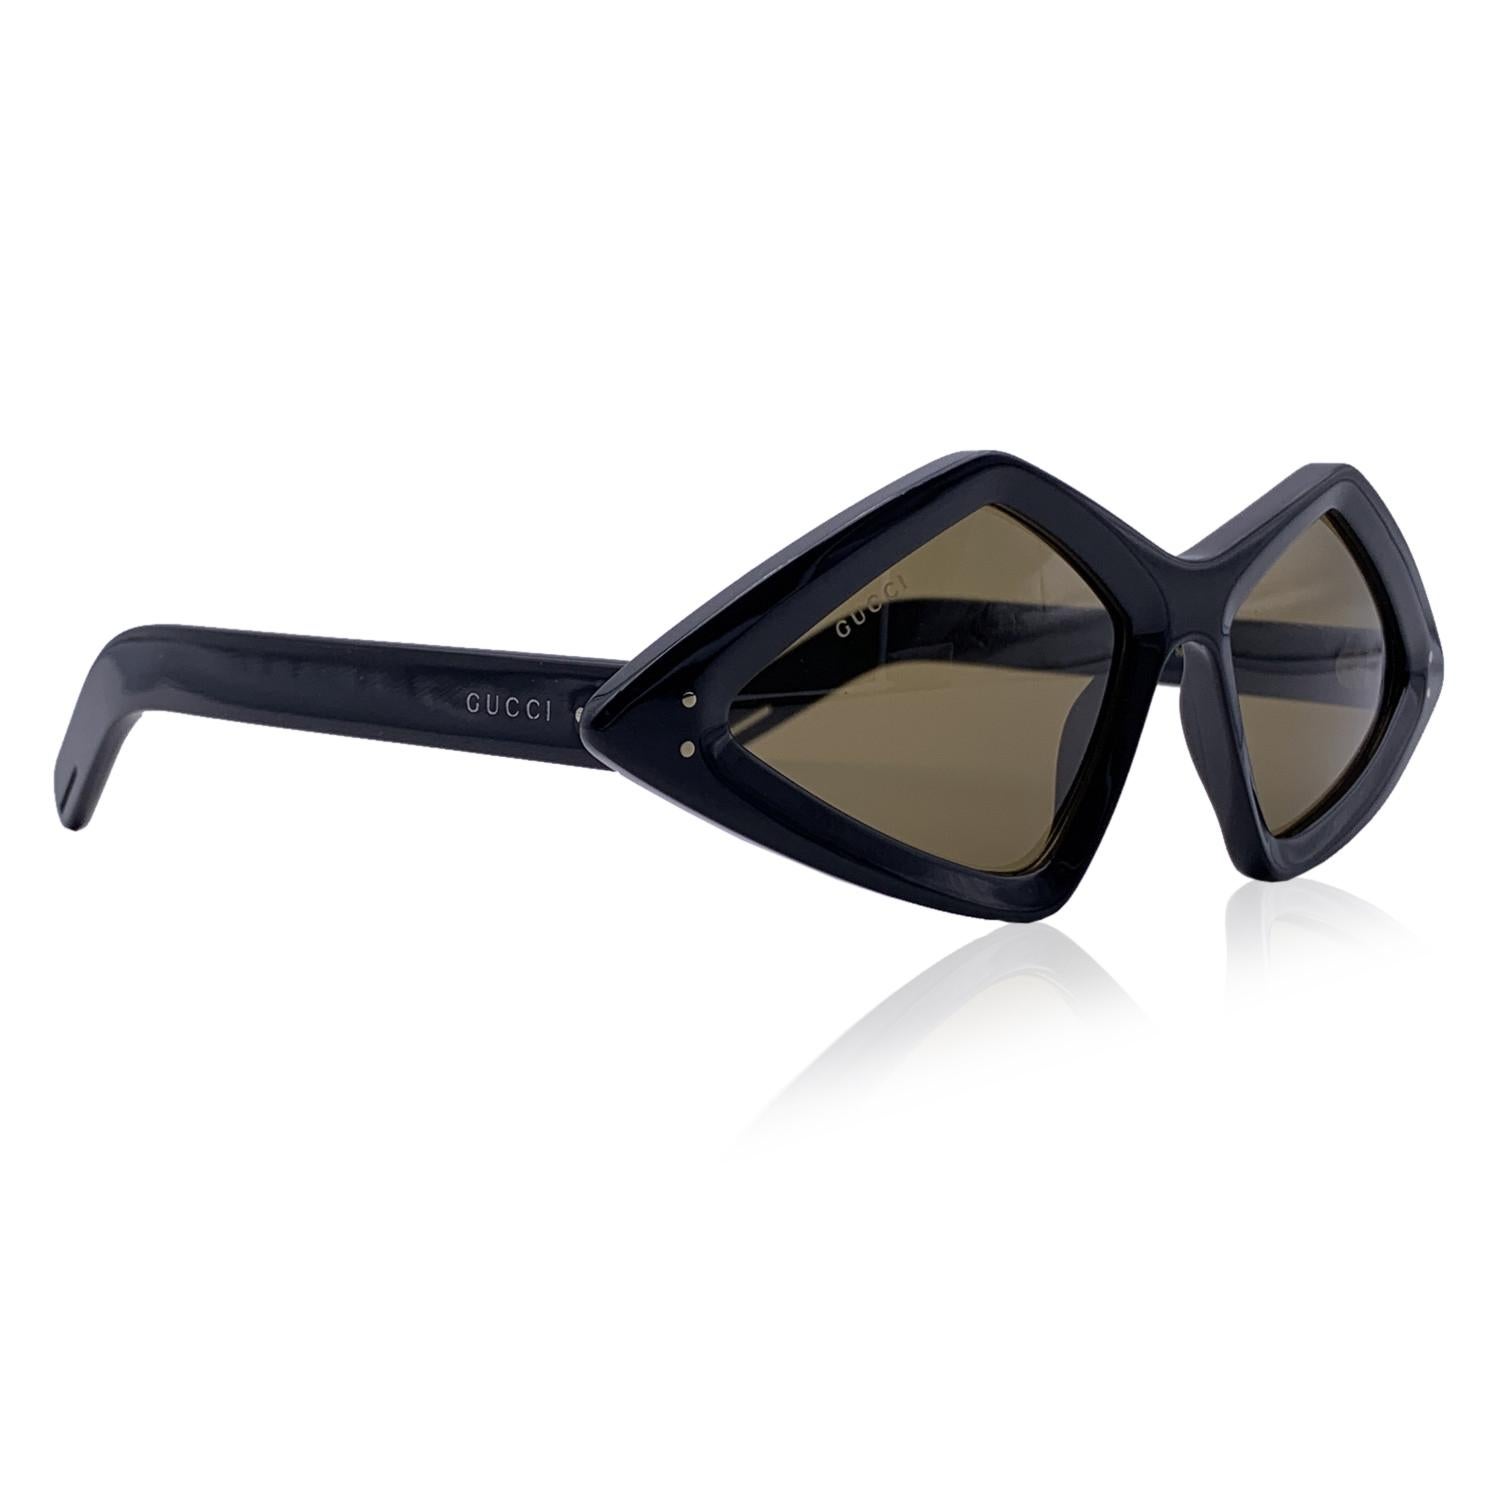 Gucci Sunglasses Model GG0496S - 001. Black acetate frame. Gucci signatures on temples. Original brown lenses. Mod & refs: GG0496S - 001 - 59/18 - 145. Made in Italy

Details

MATERIAL: Acetate

COLOR: Black

MODEL: GG0496S

GENDER: Women

COUNTRY